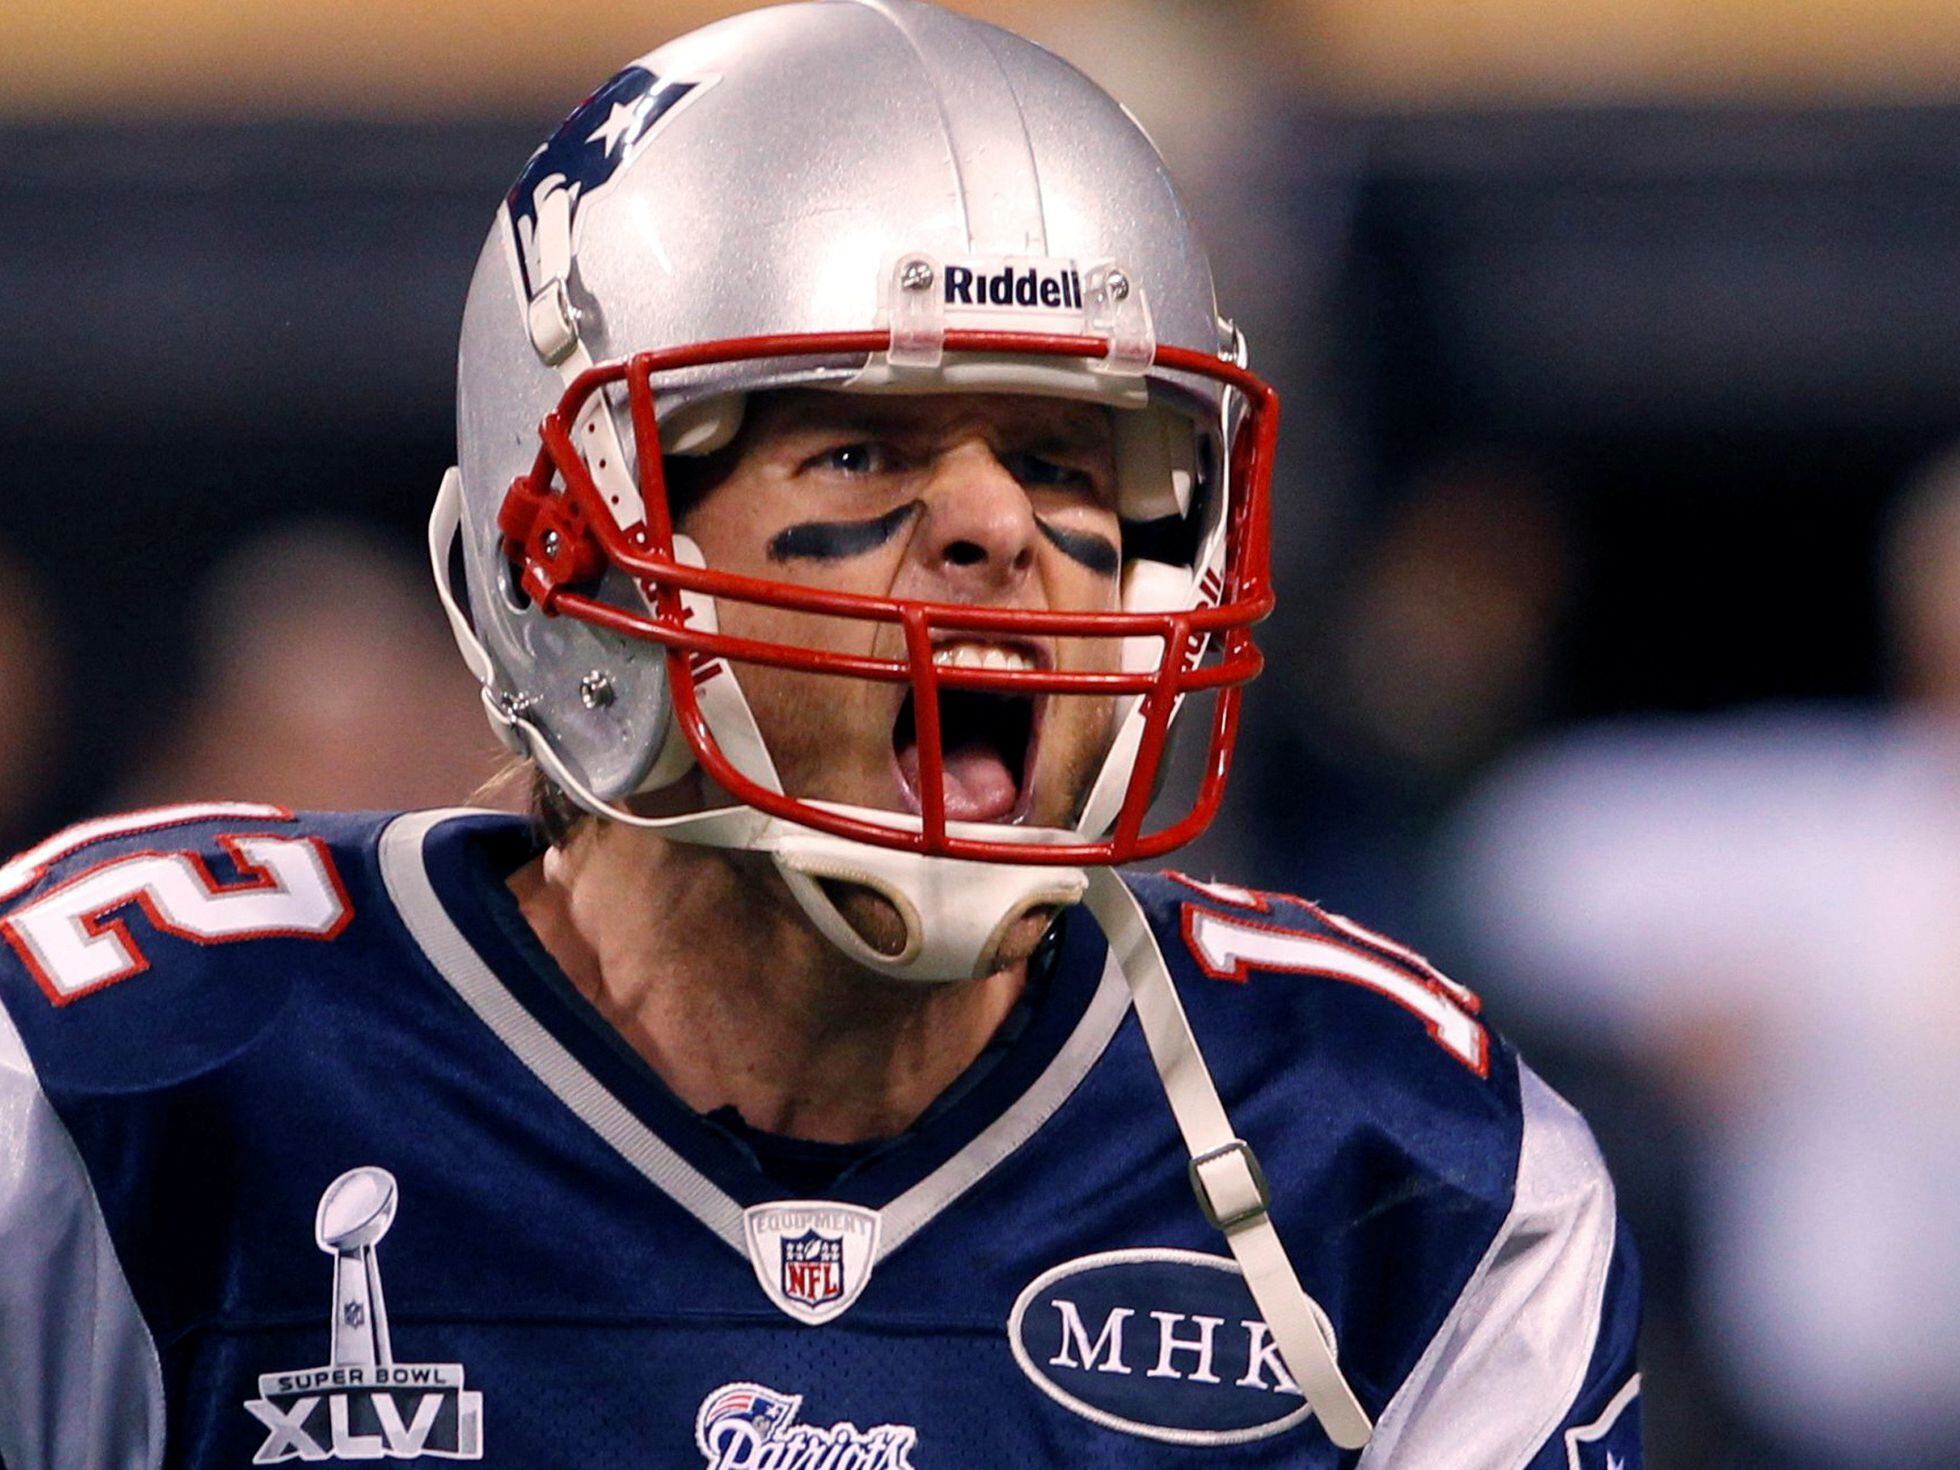 Tom Brady retires from NFL, insisting this time it's for good